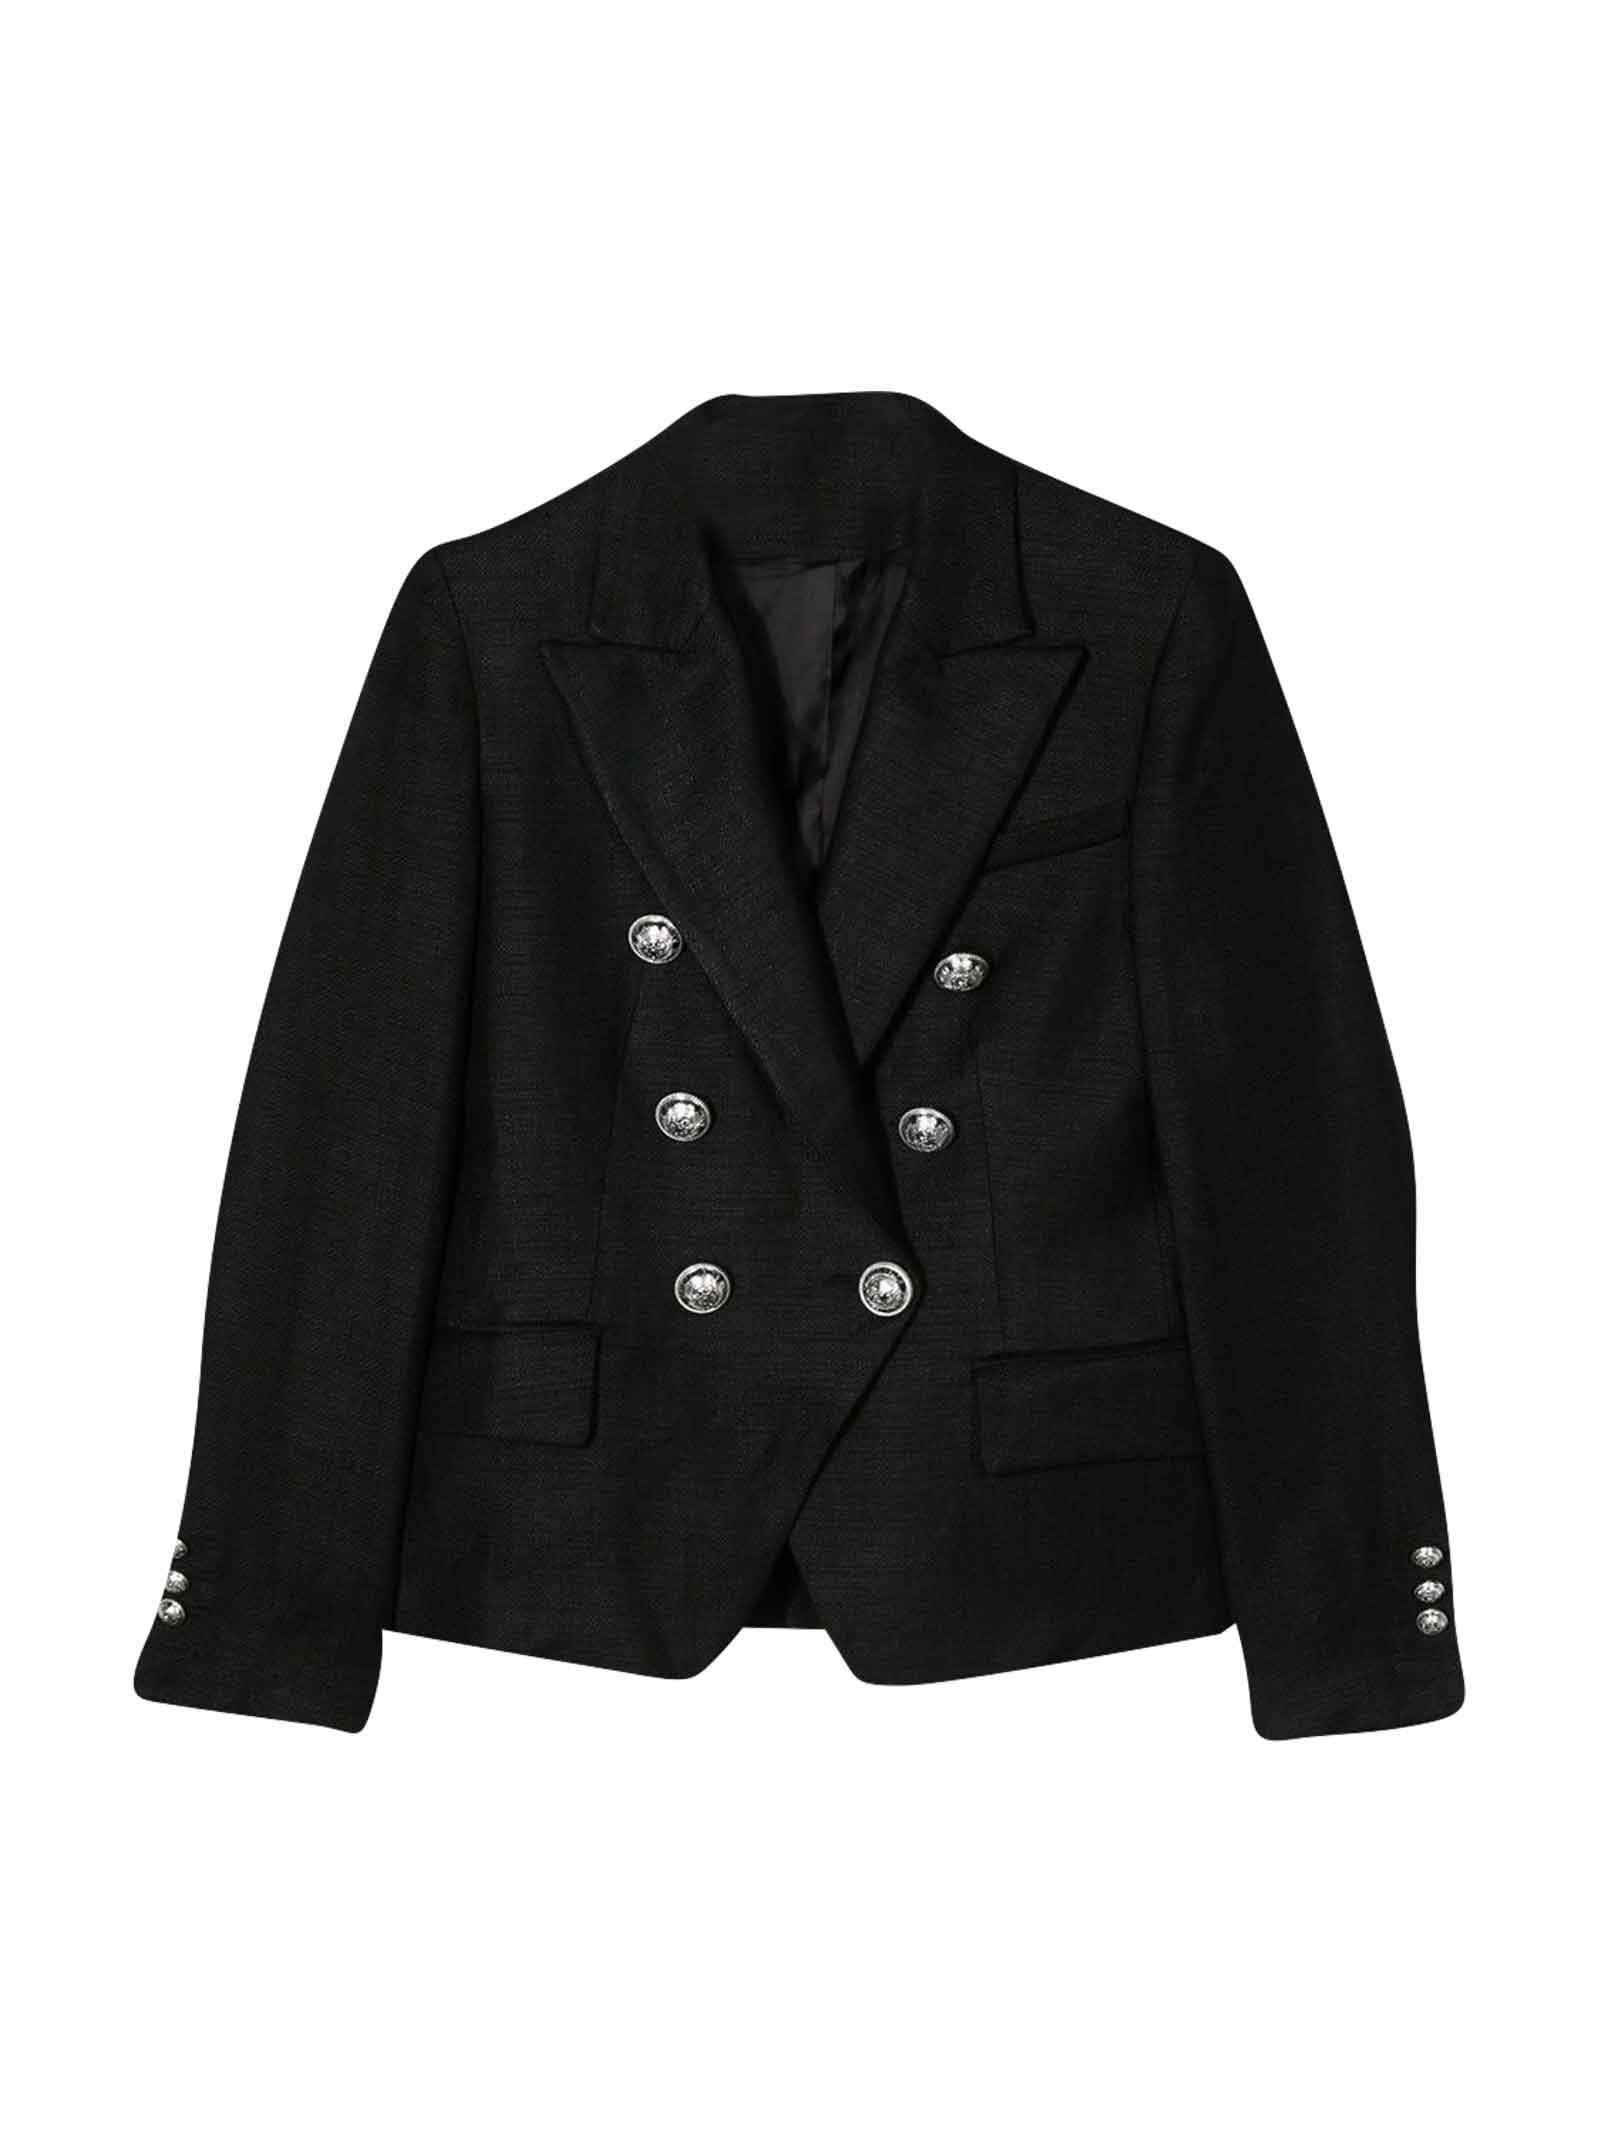 Balmain Black Blazer With Double-breasted